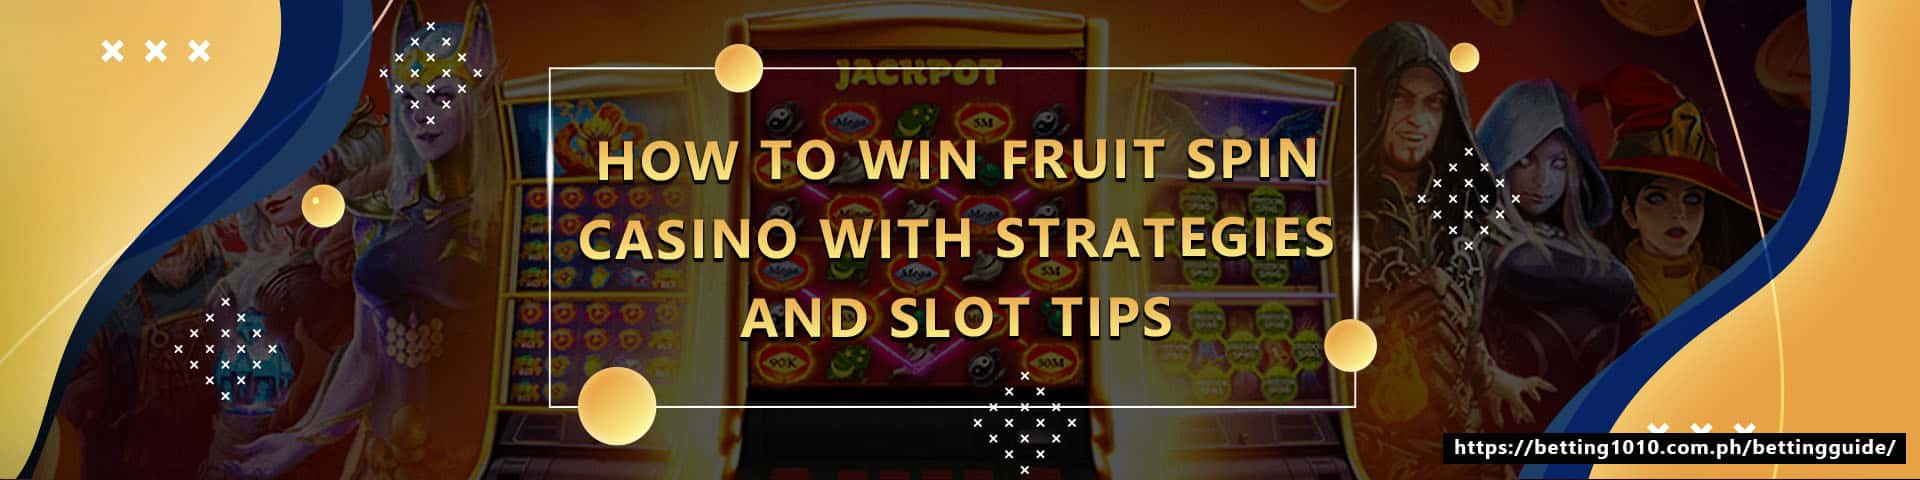 How To Win Fruit Spin Casino with Strategies And Slot Tips